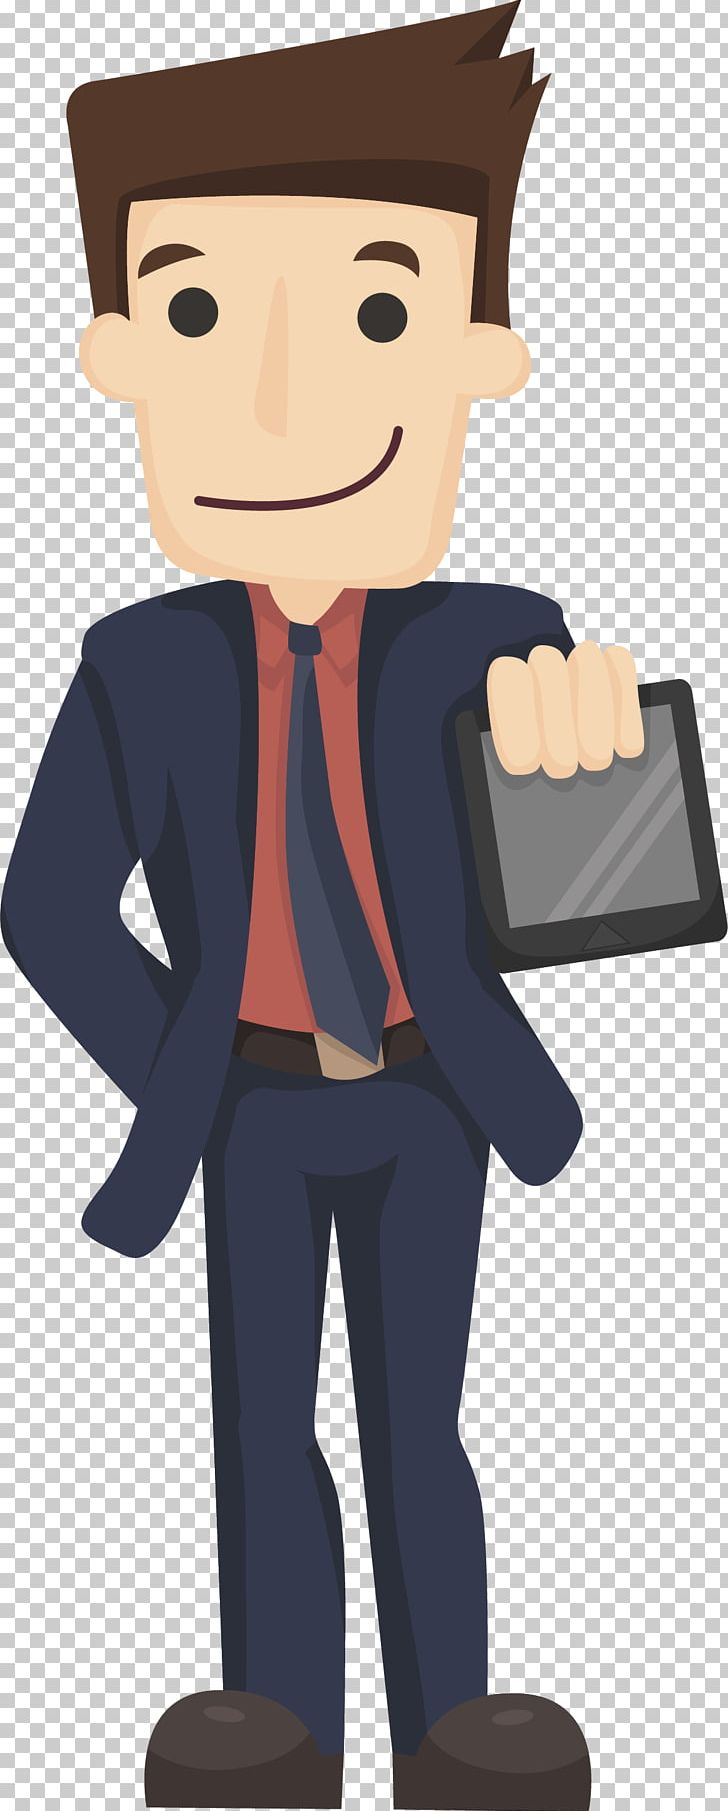 Businessperson Cartoon Illustration PNG, Clipart, Business, Cell, Cell Phone, Company, Encapsulated Postscript Free PNG Download